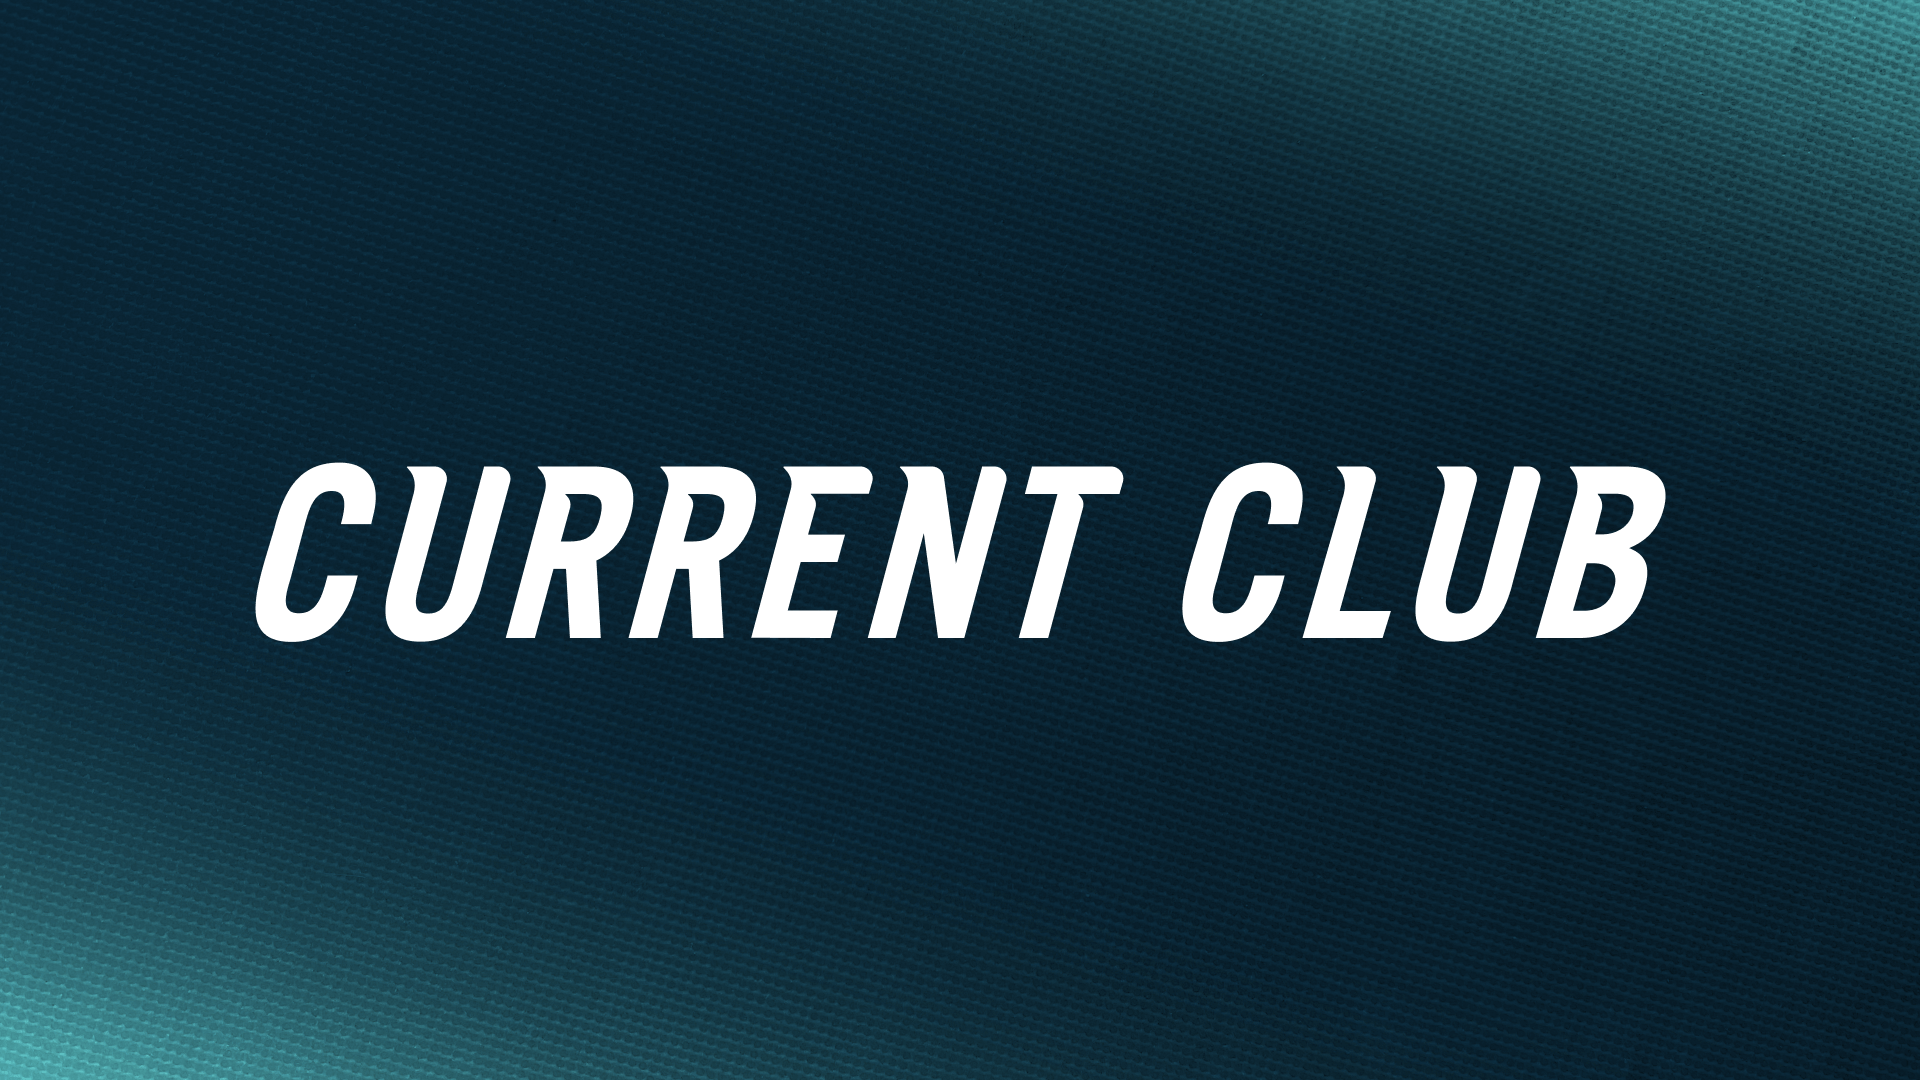 A graphic that says "Current Club"  and links to a page to learn more about the club.